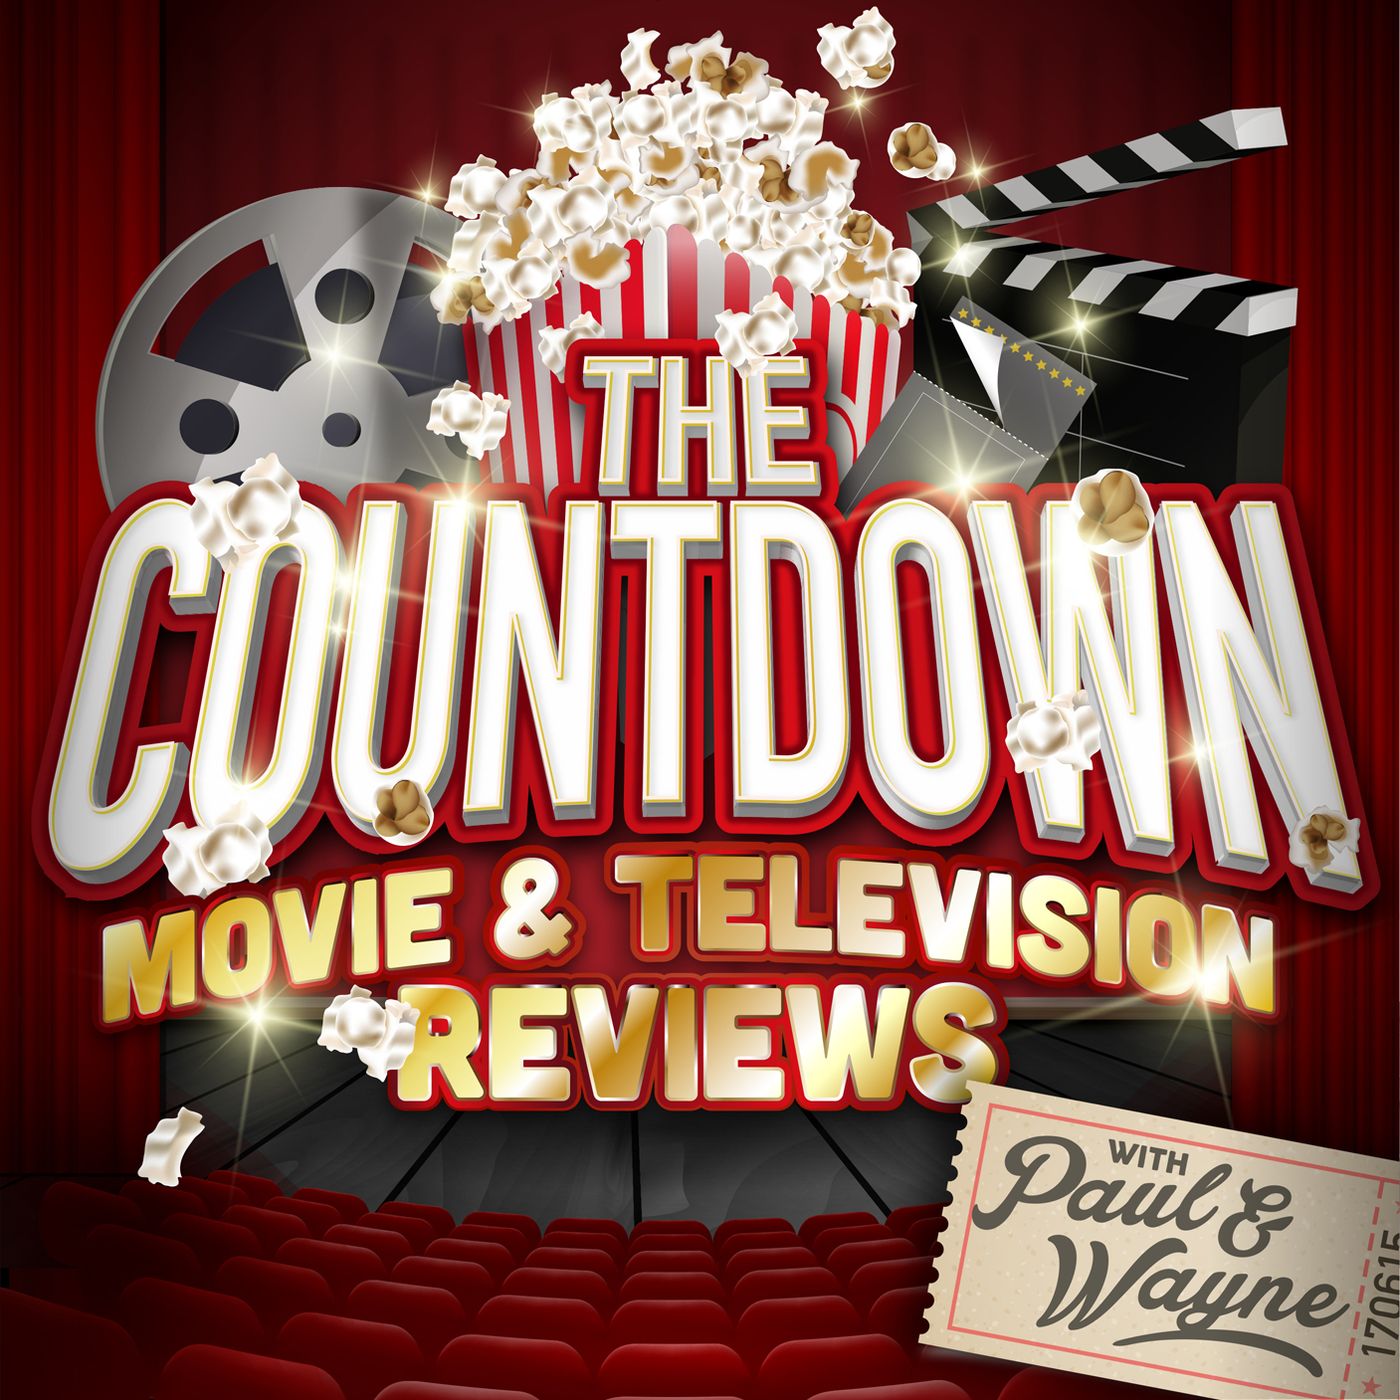 The Countdown: Movie and TV Reviews